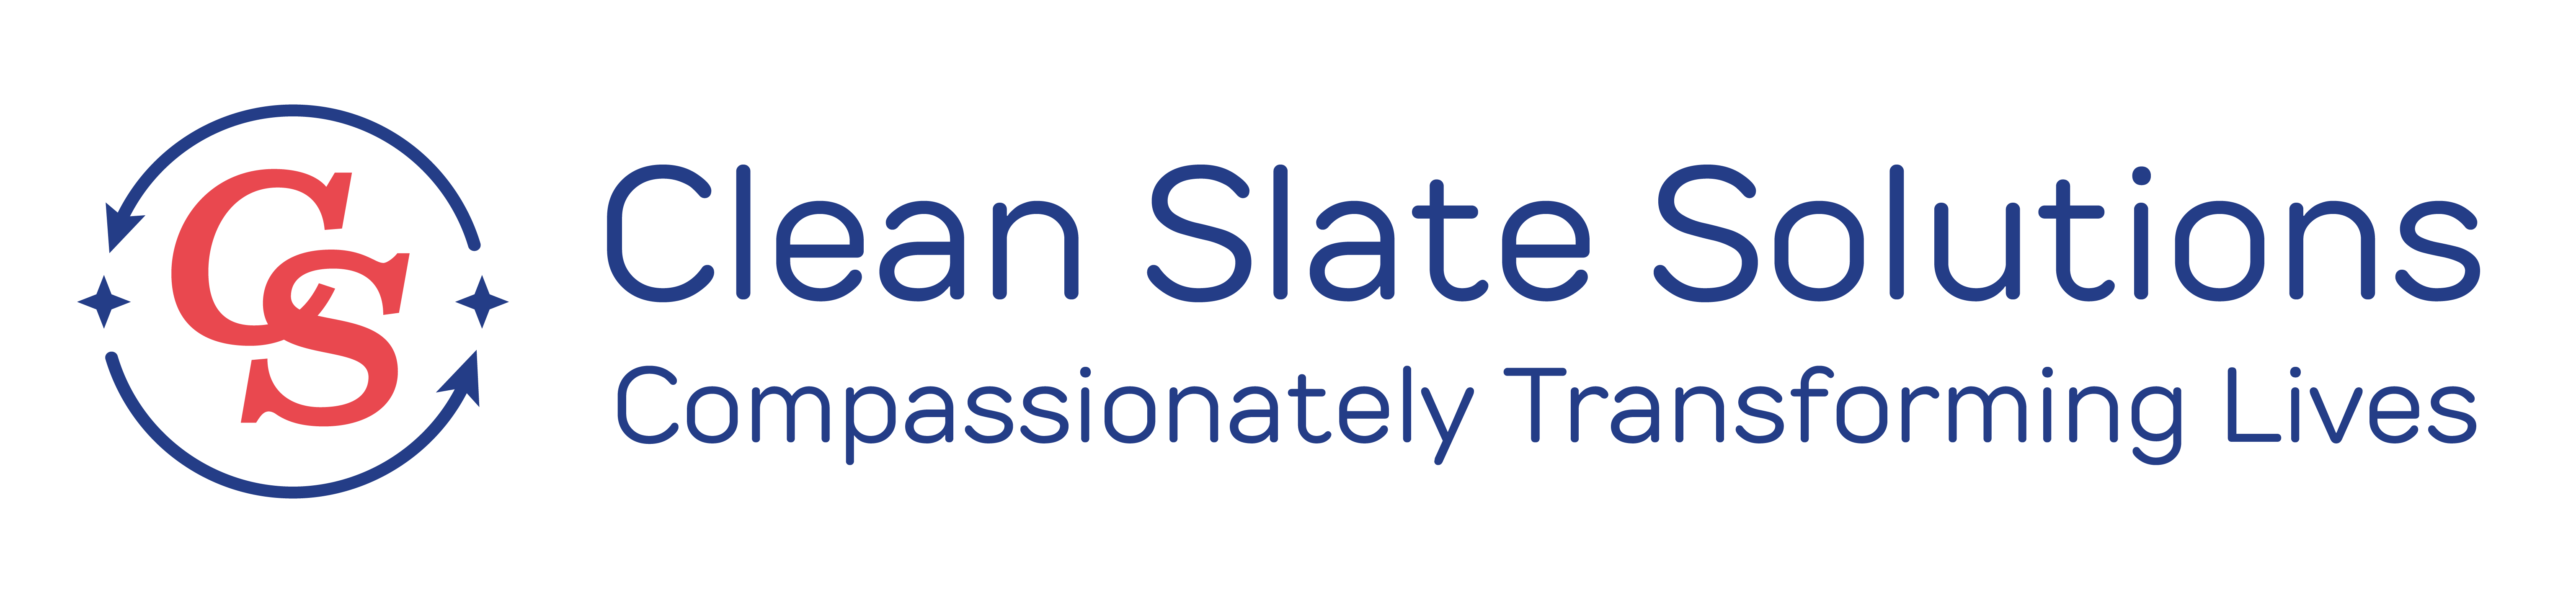 logo for Clean Slate Solutions